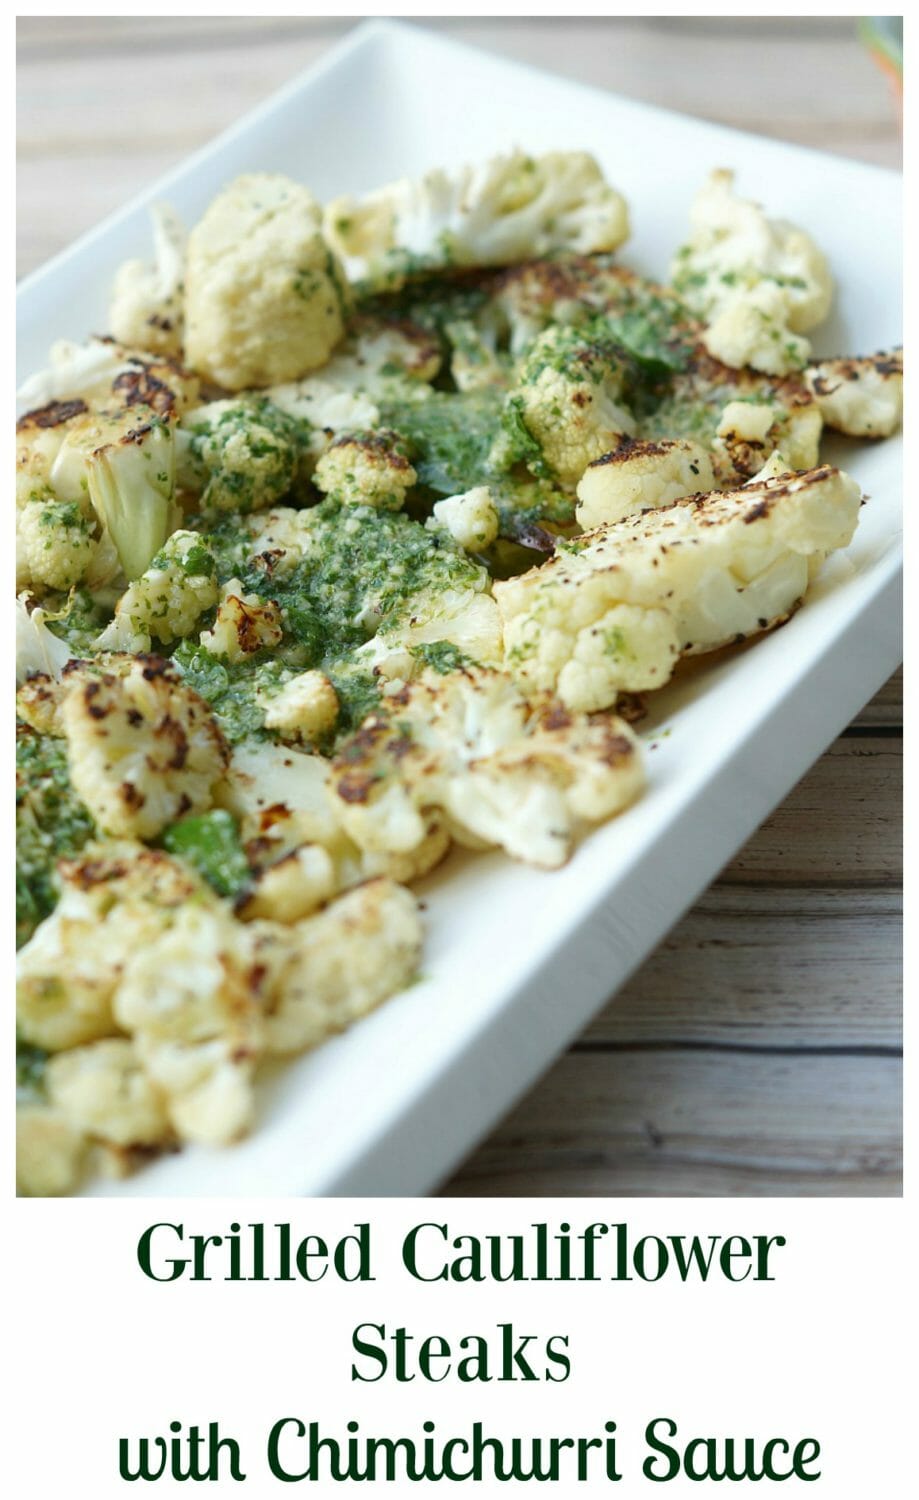 Grilled Cauliflower Steaks with Chimichurri Sauce 